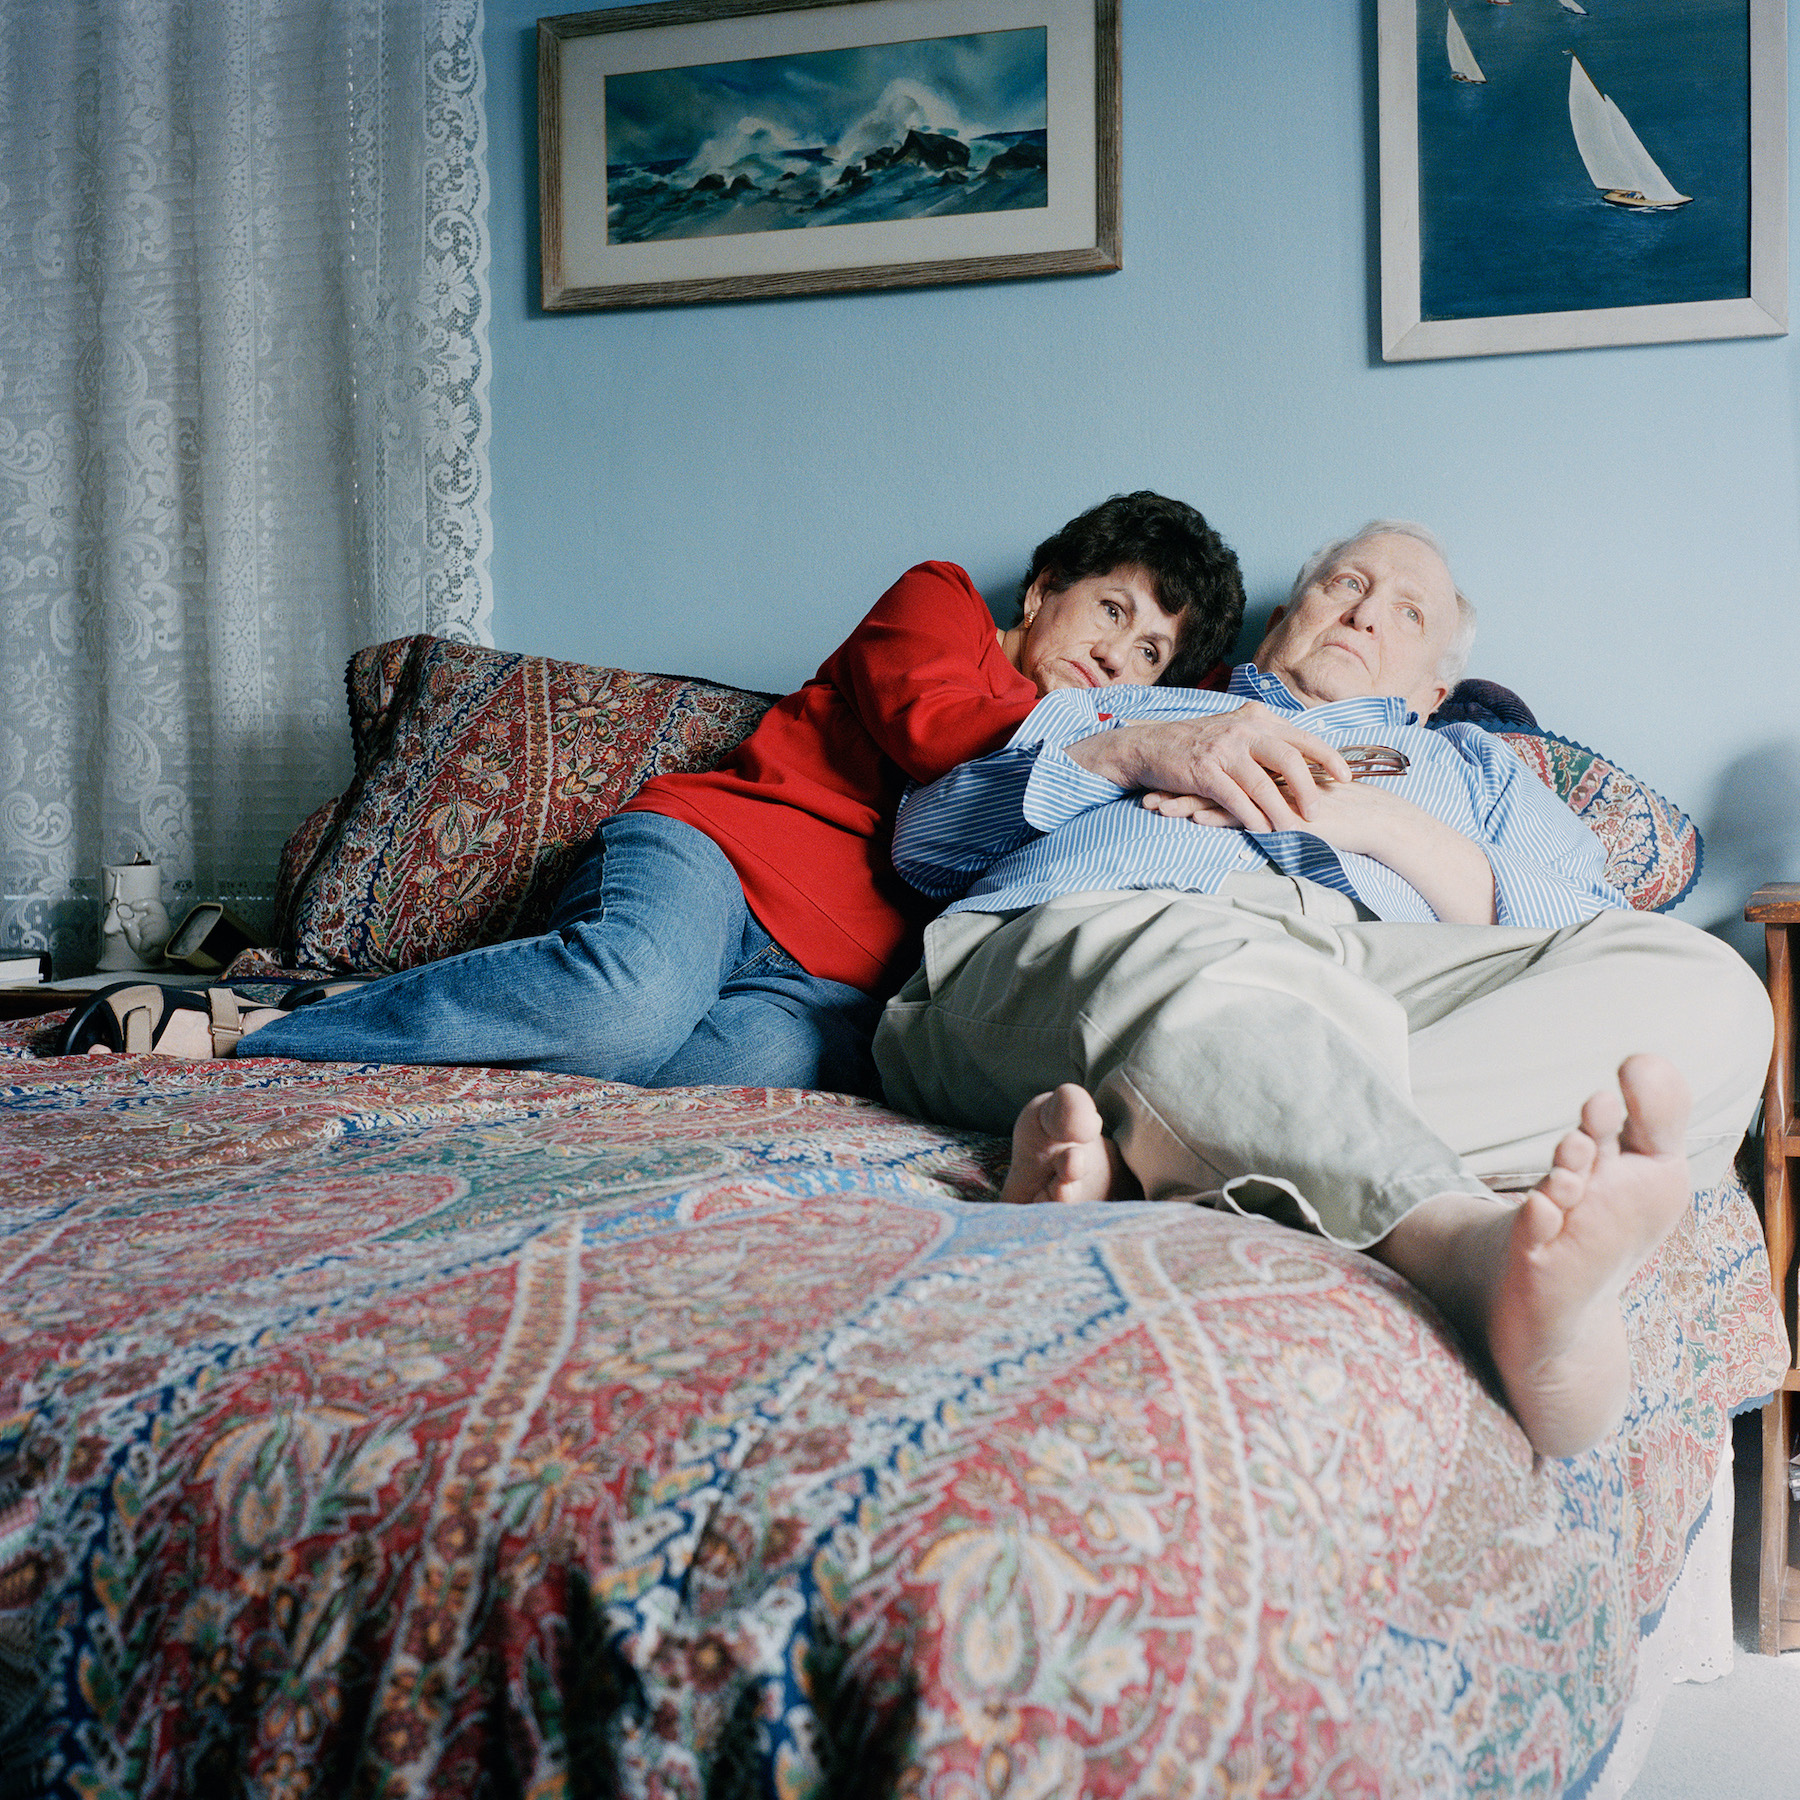 41-Ben-Zion_Yael_Carmen-and-Robert-on-the-bed_c-print_16x16in_2007_